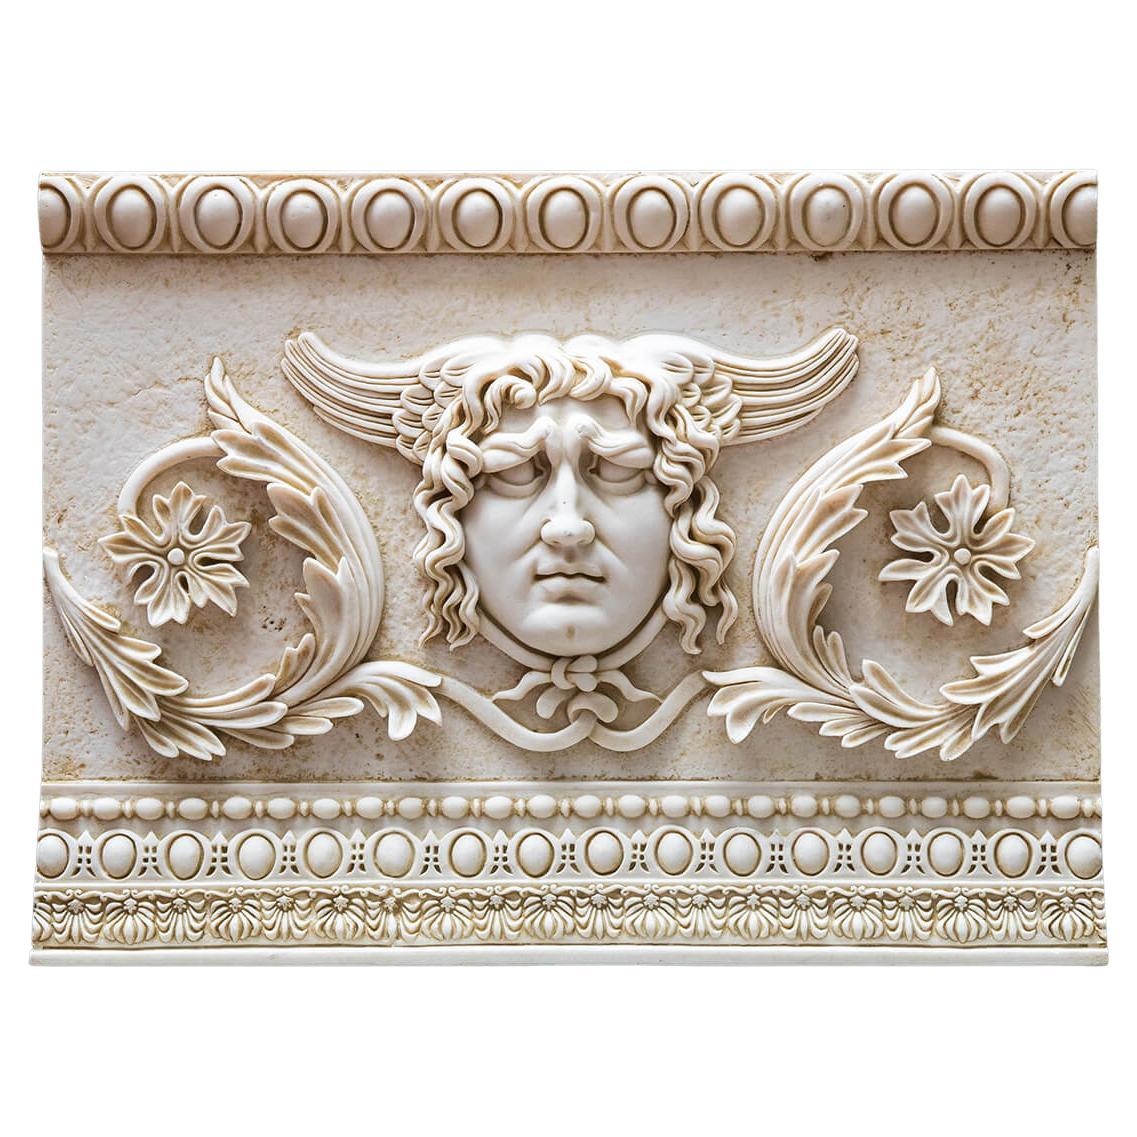 Medusa Relief Made with Compressed Marble Powder